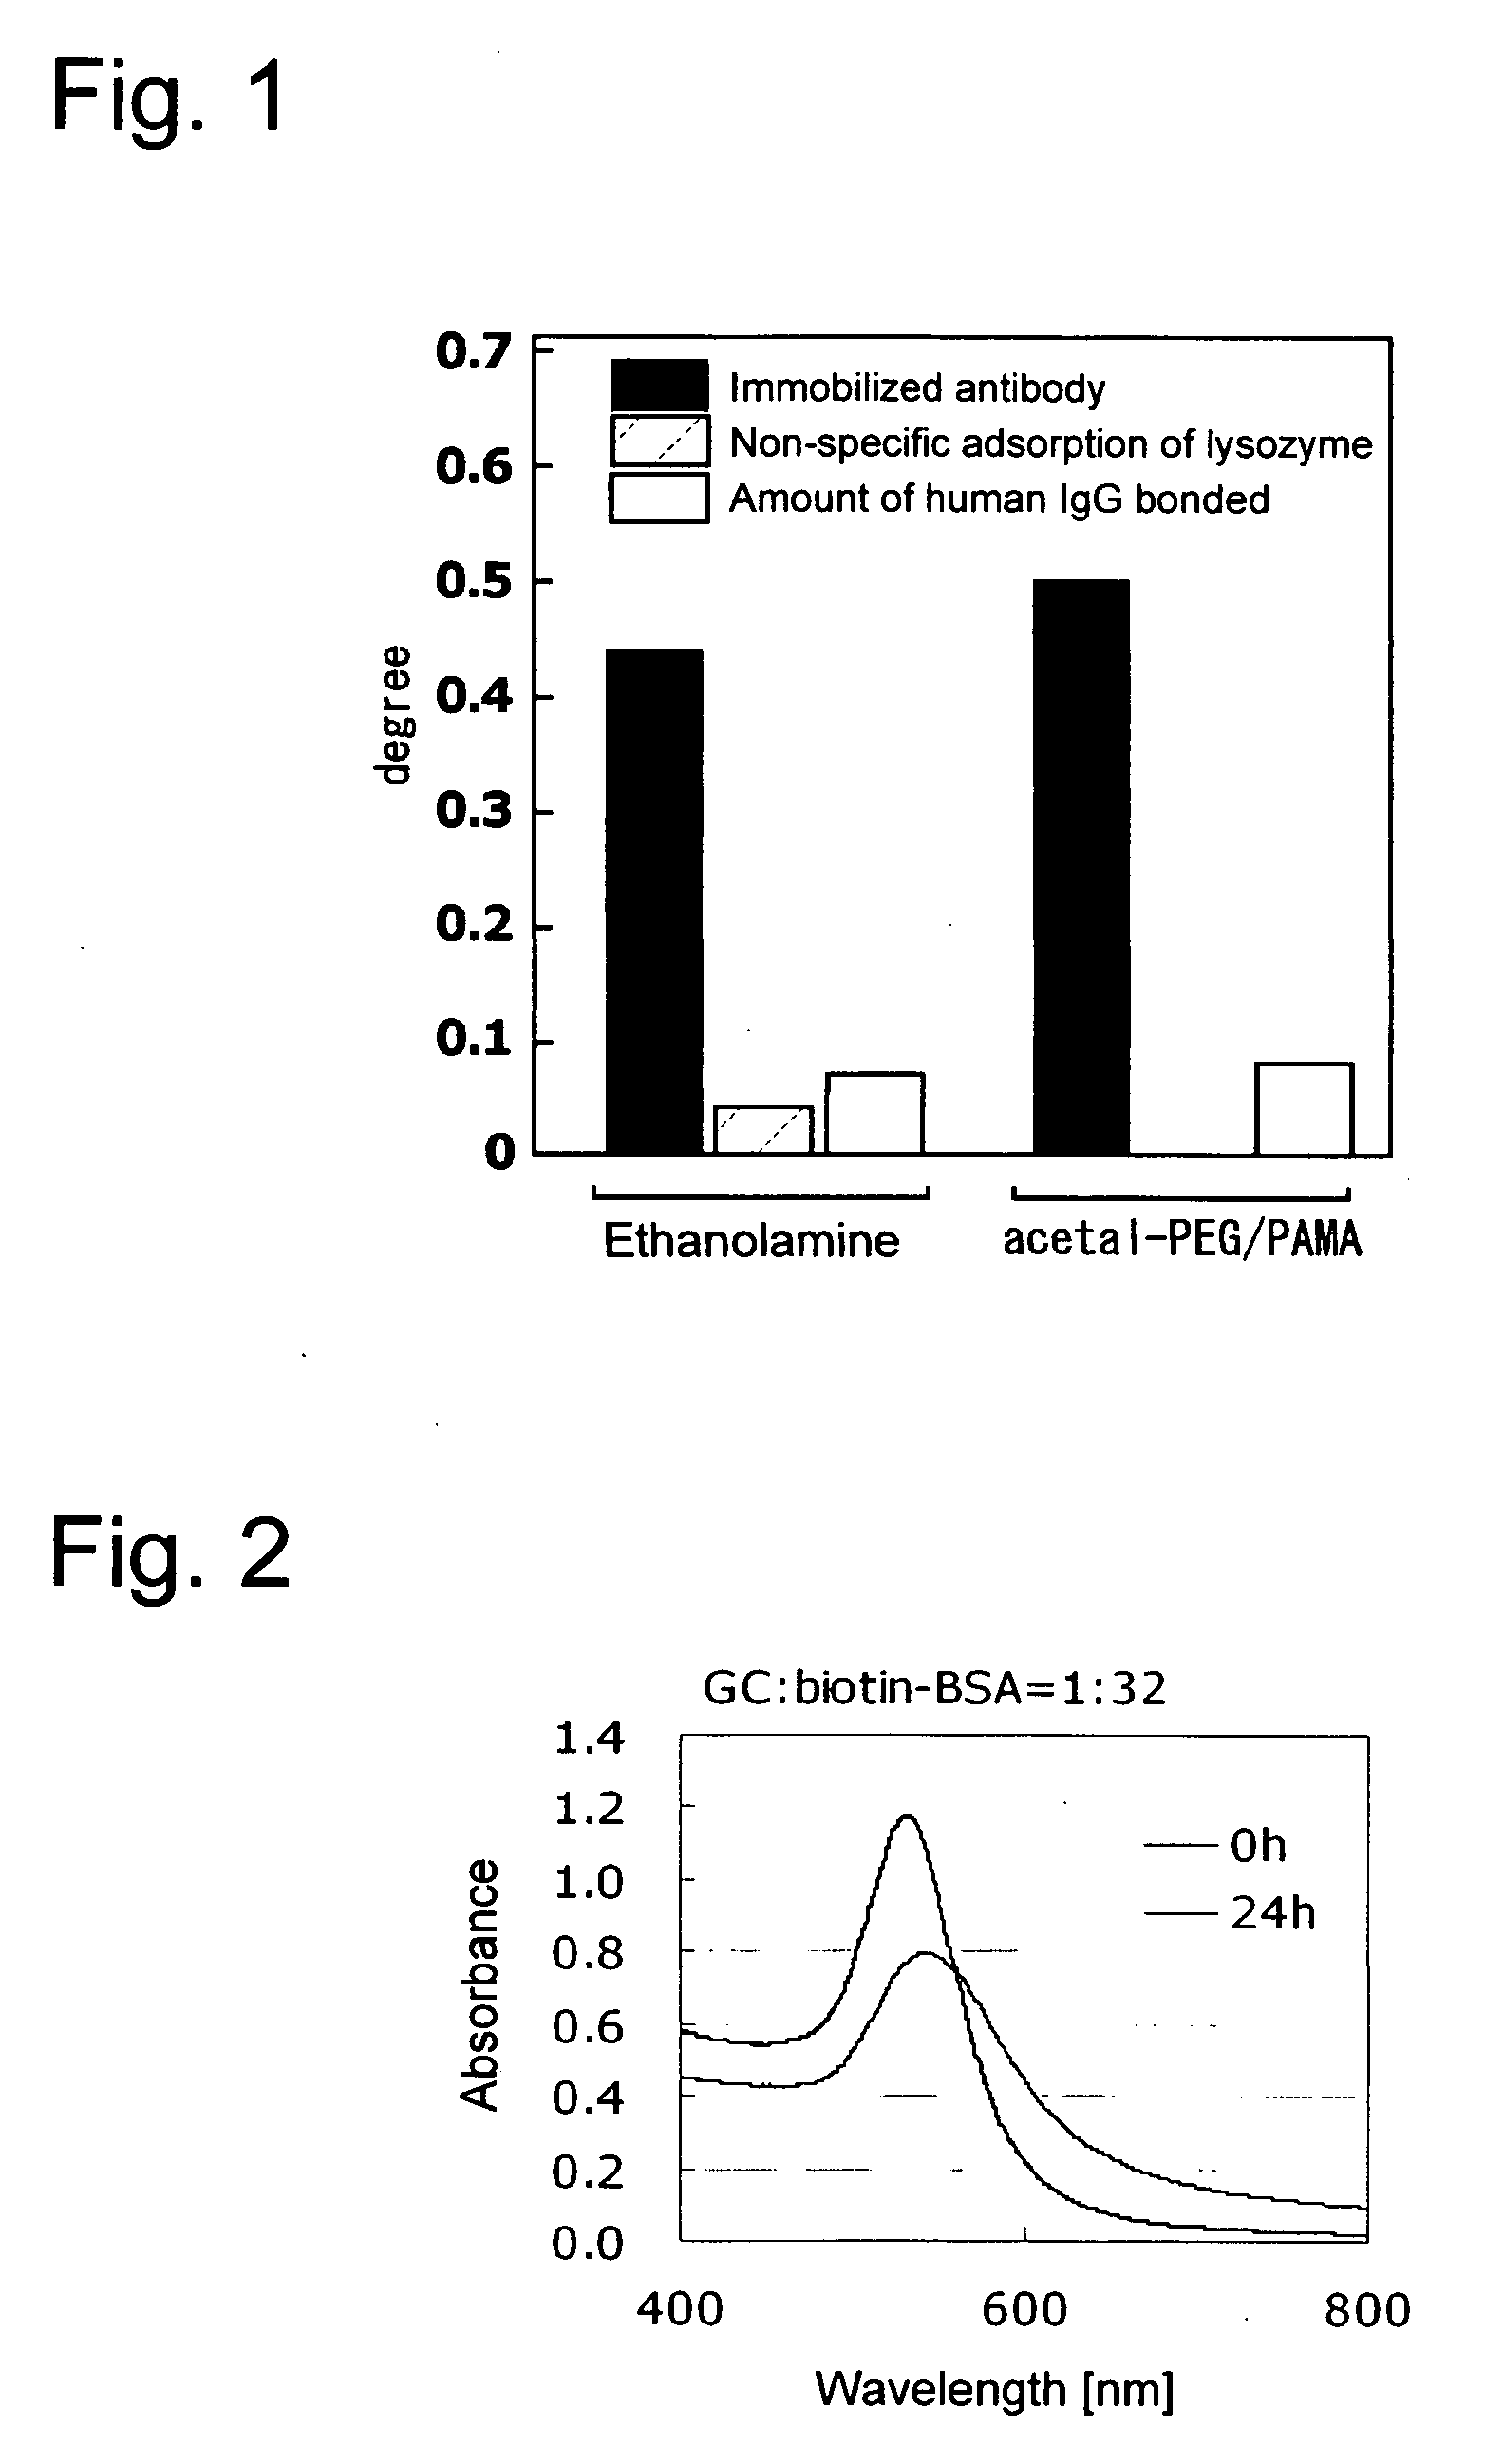 Surface of base material being inhibited in non-specific adsorption